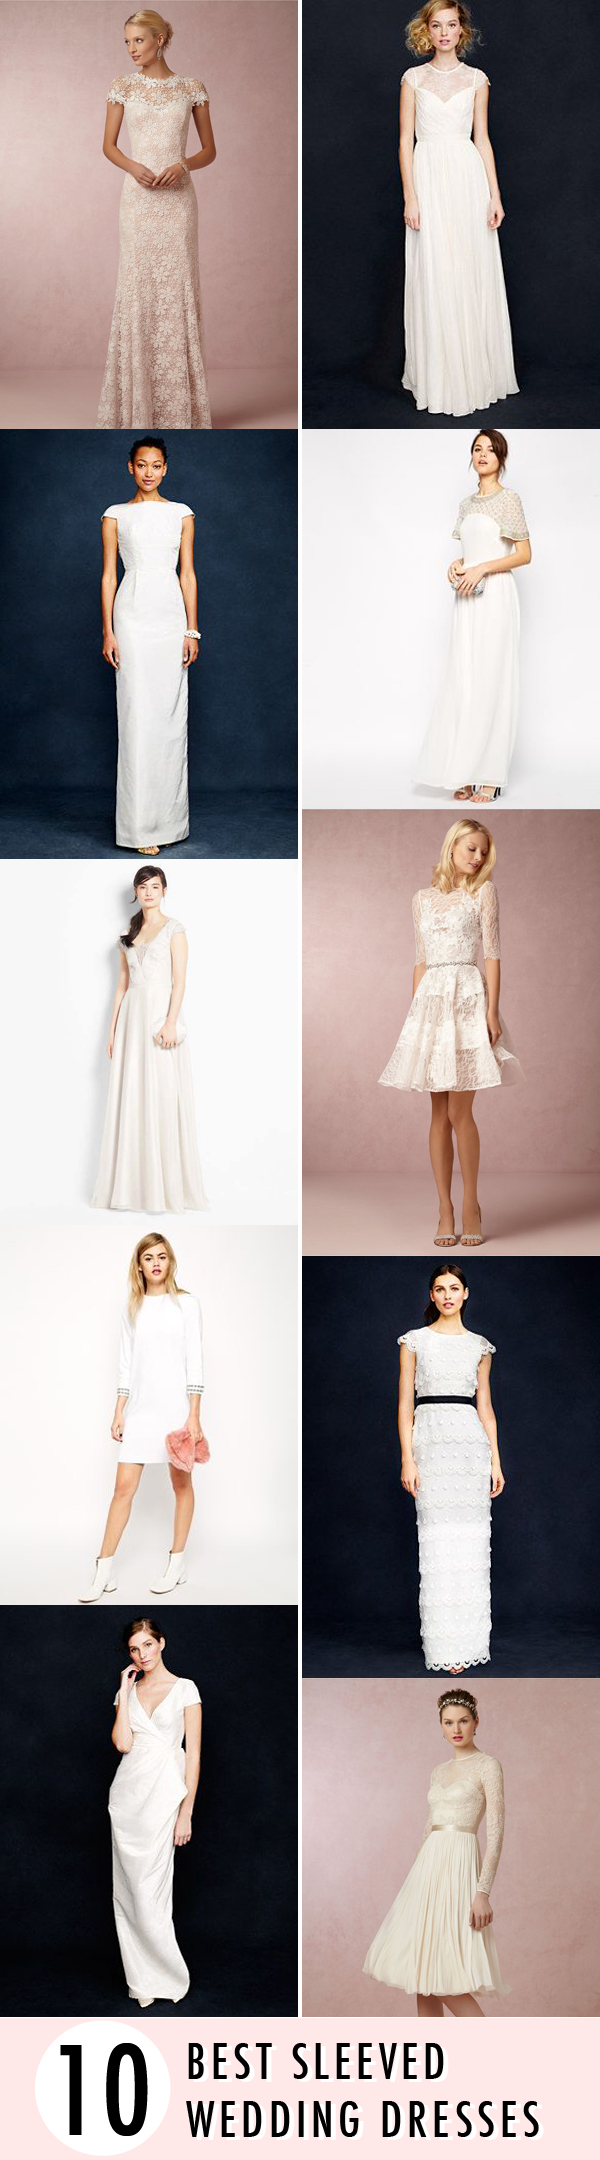 WEDDING-DRESSES-WITH-SLEEVES